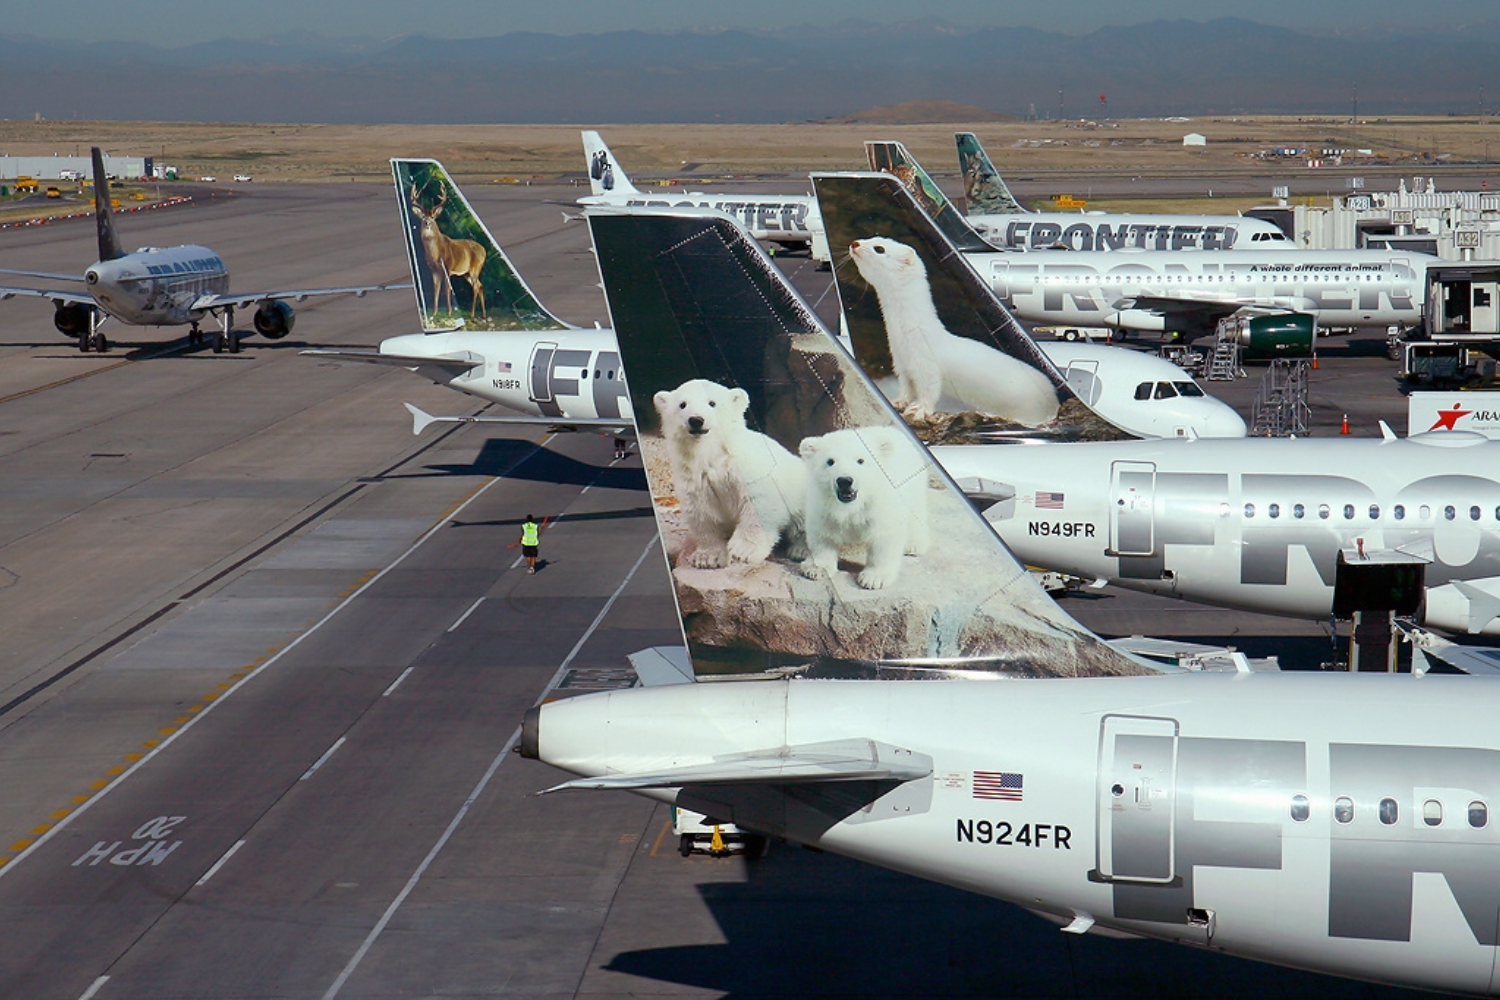 seven frontier aircrafts at an airport: why is frontier so cheap